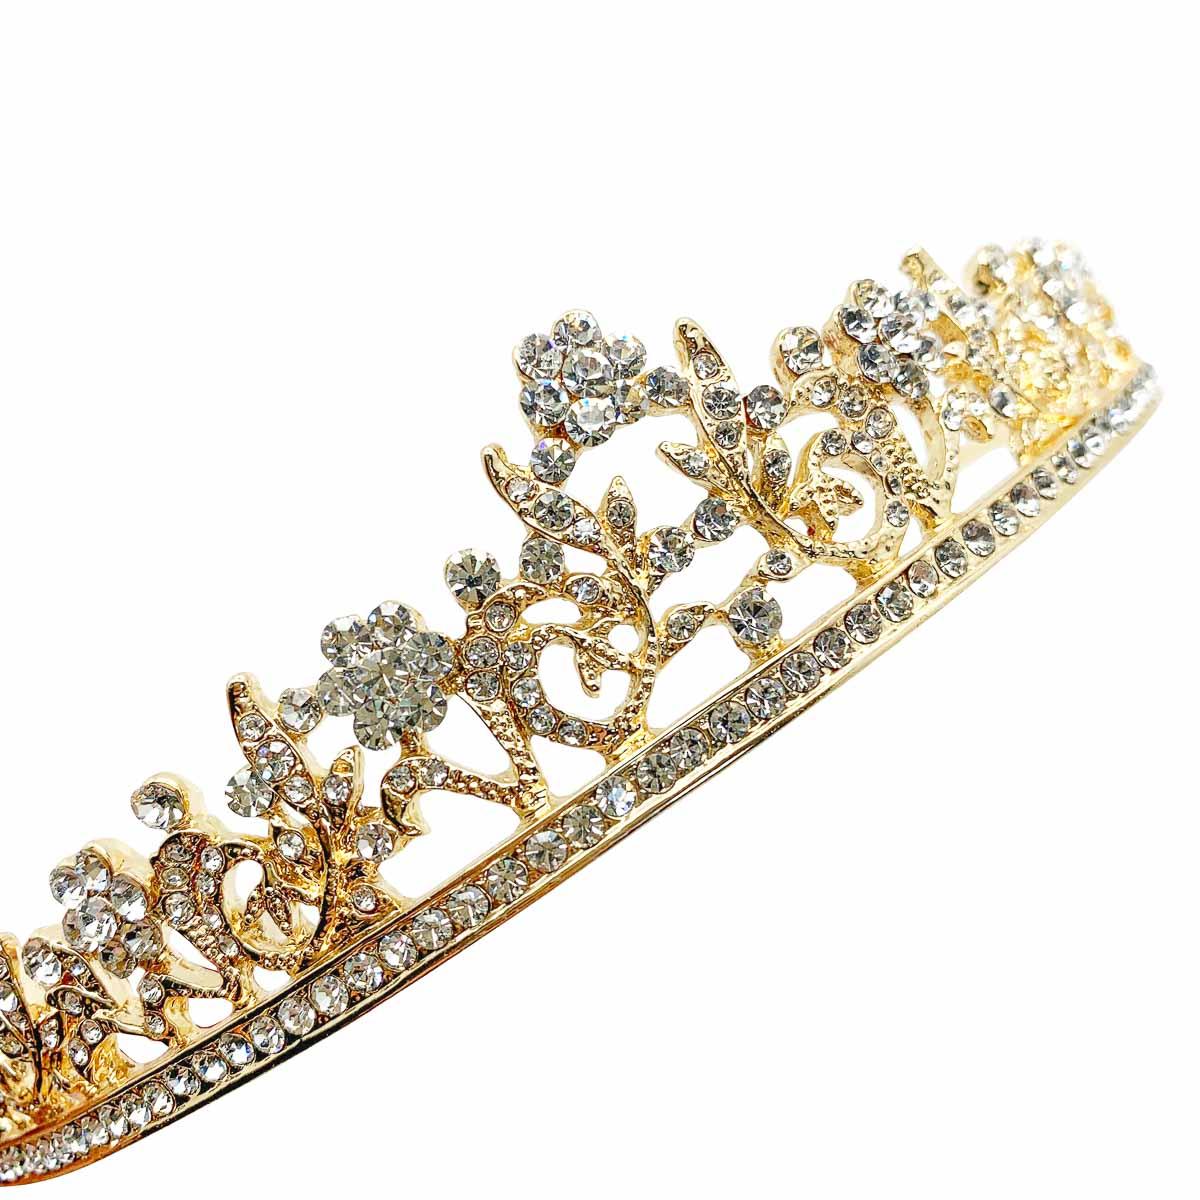 A delightful vintage floral tiara. Enjoy the age-old tradition on your wedding day with this emblem that signifies the crowning of love.

Vintage Condition: Very good without damage or noteworthy wear.
Materials: gold plate, glass crystal
Signed: